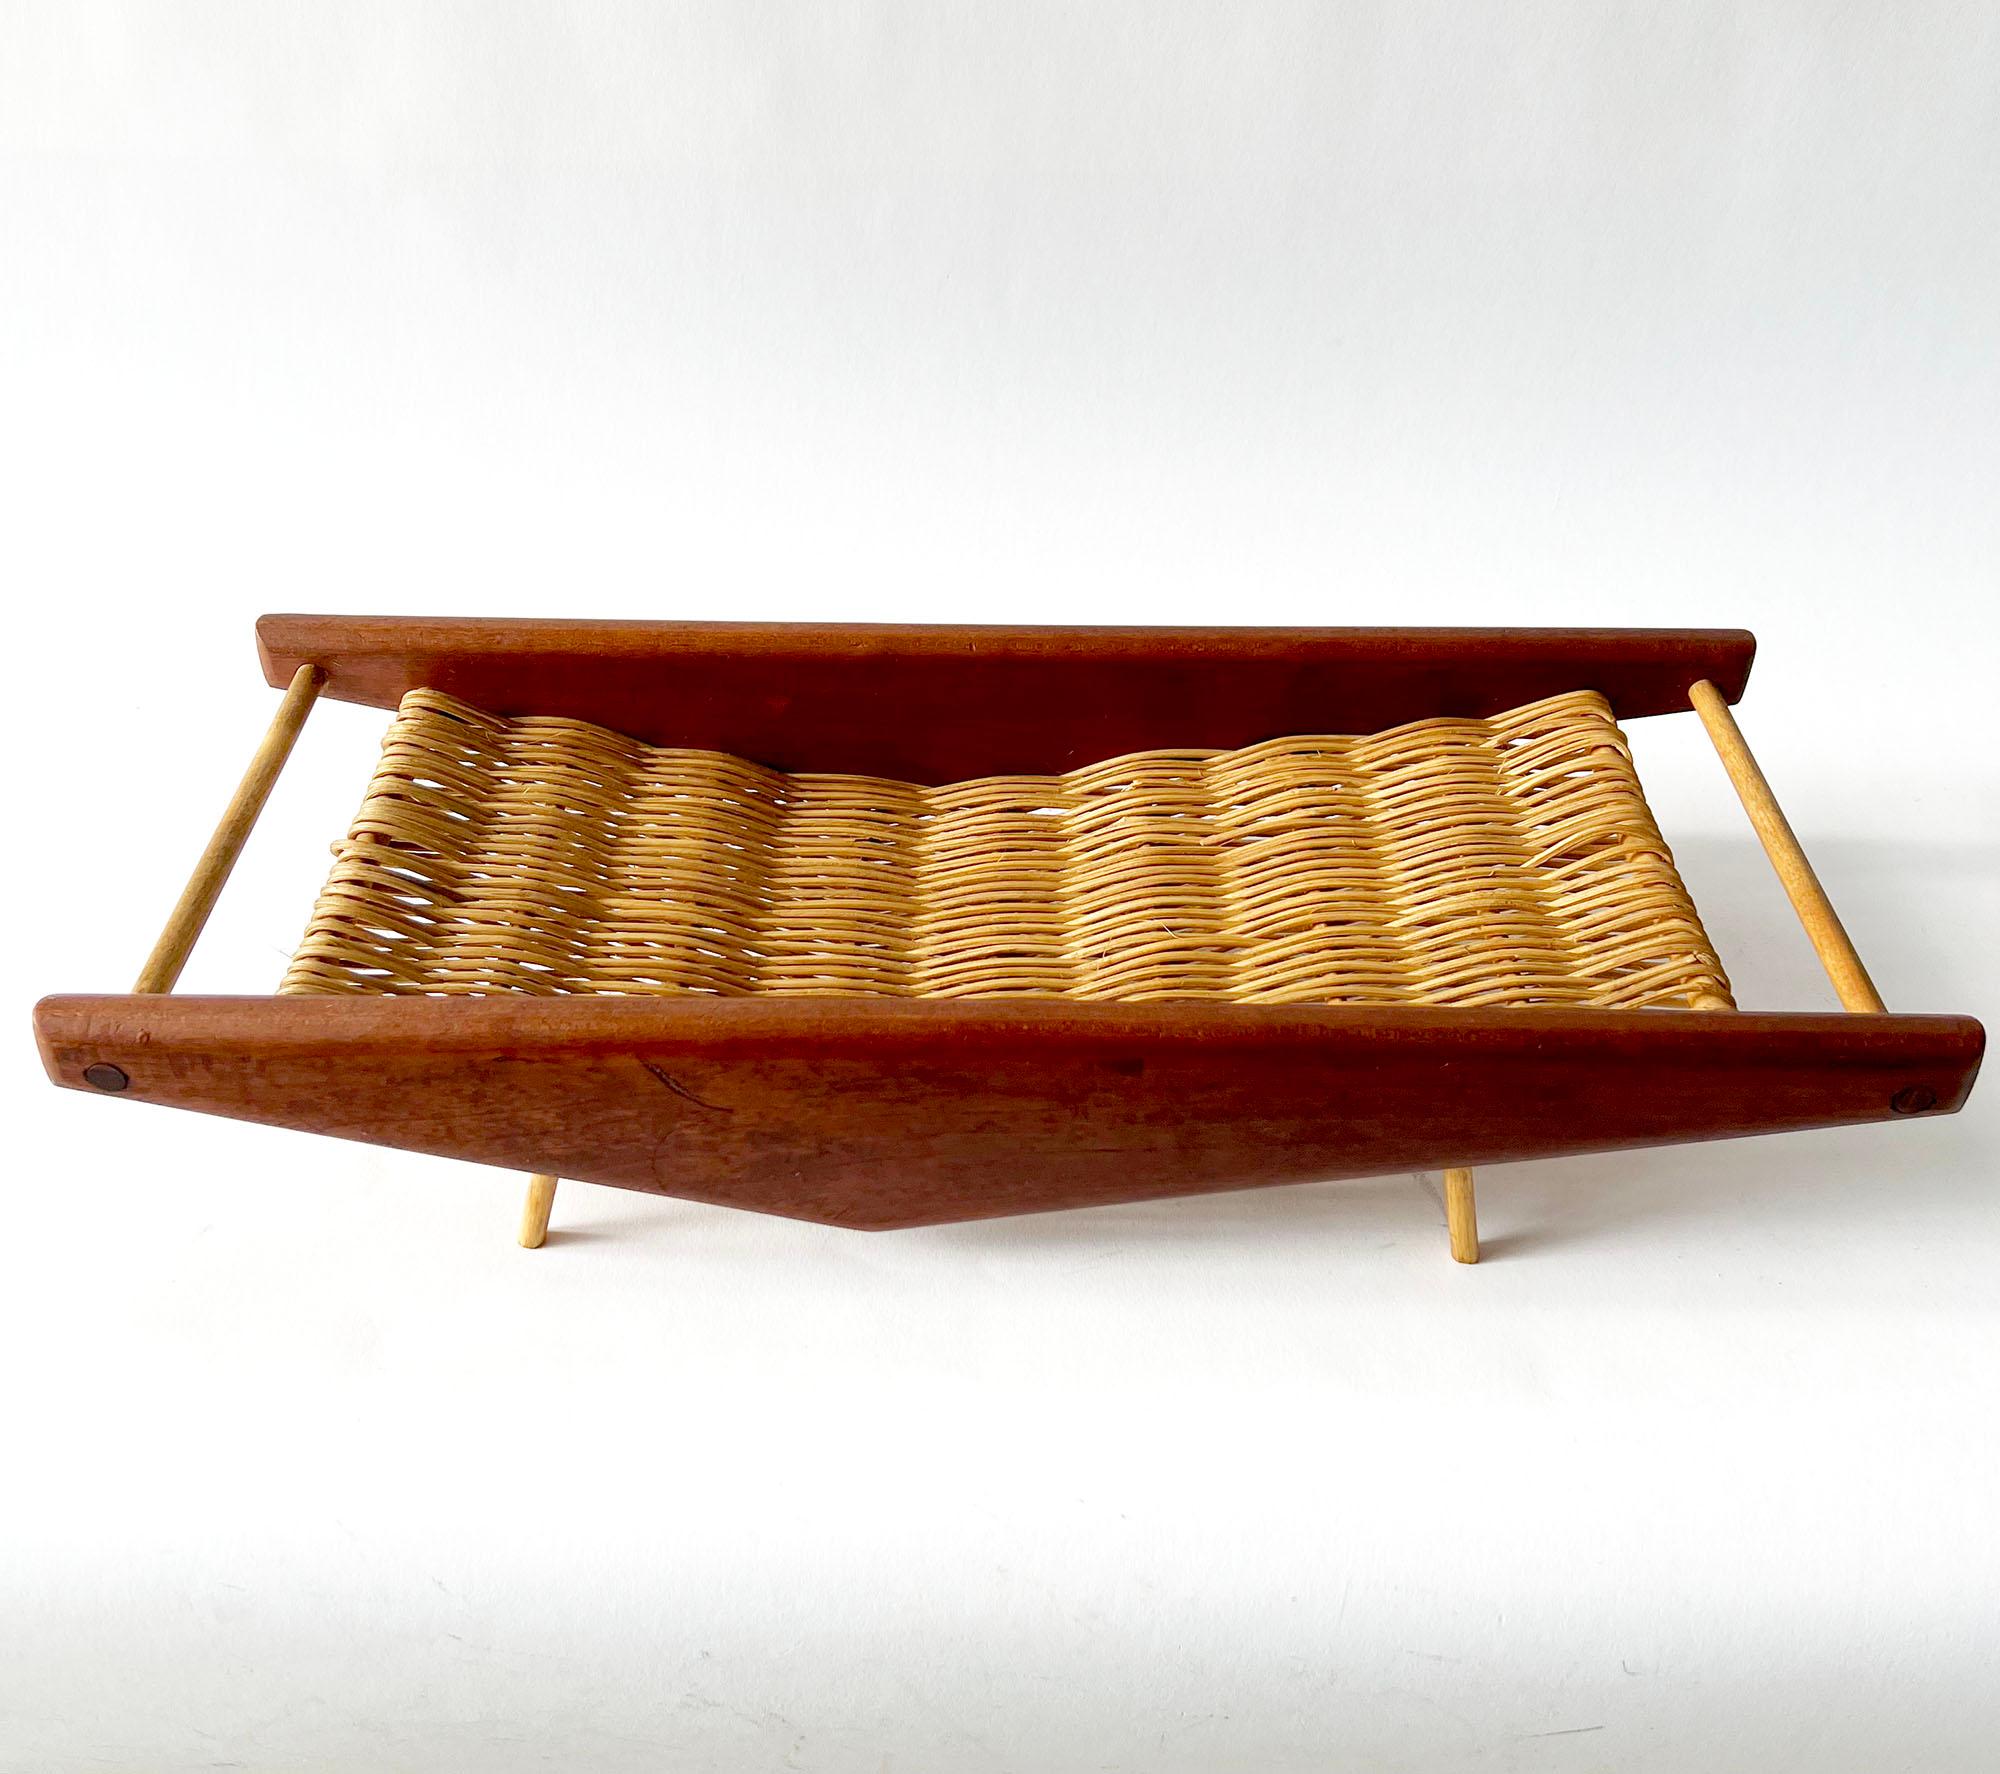 1950s, Arthur Umanoff Teak Wood with Hand Woven Wicker Rattan Basket In Good Condition For Sale In Palm Springs, CA